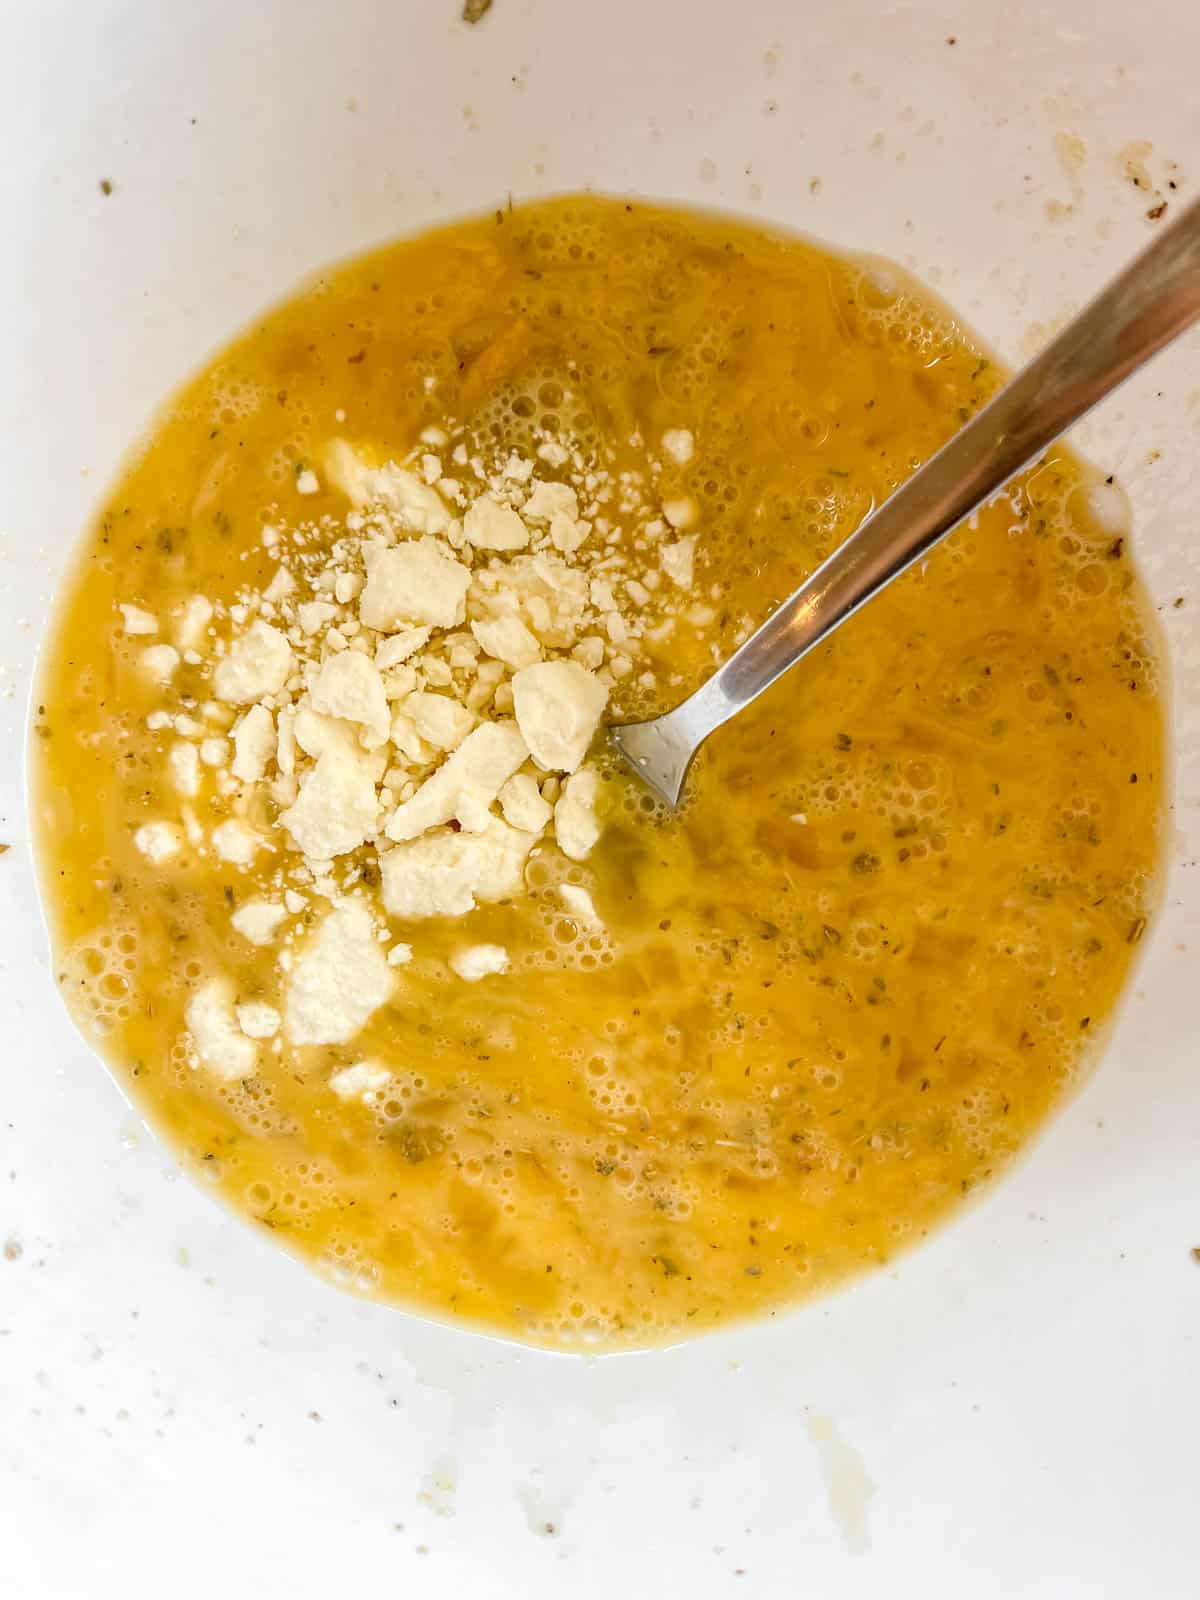 Feta and spices added to eggs in a bowl.